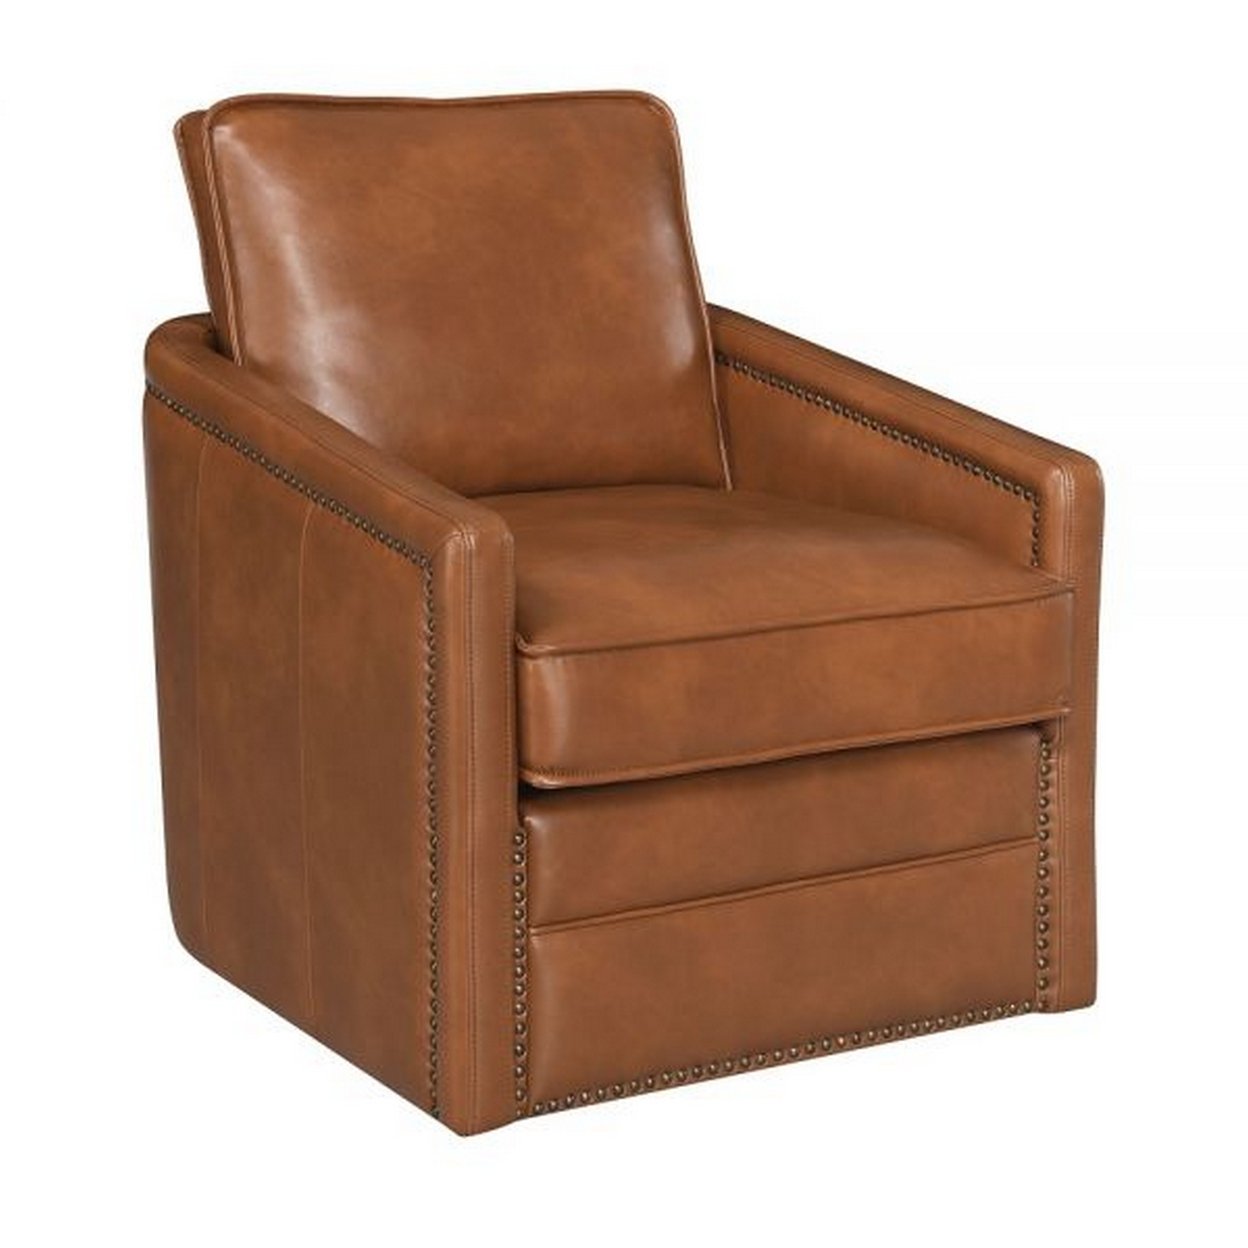 Roco 34 Inch Accent Chair With Swivel, Faux Leather Upholstery, Brown - Saltoro Sherpi